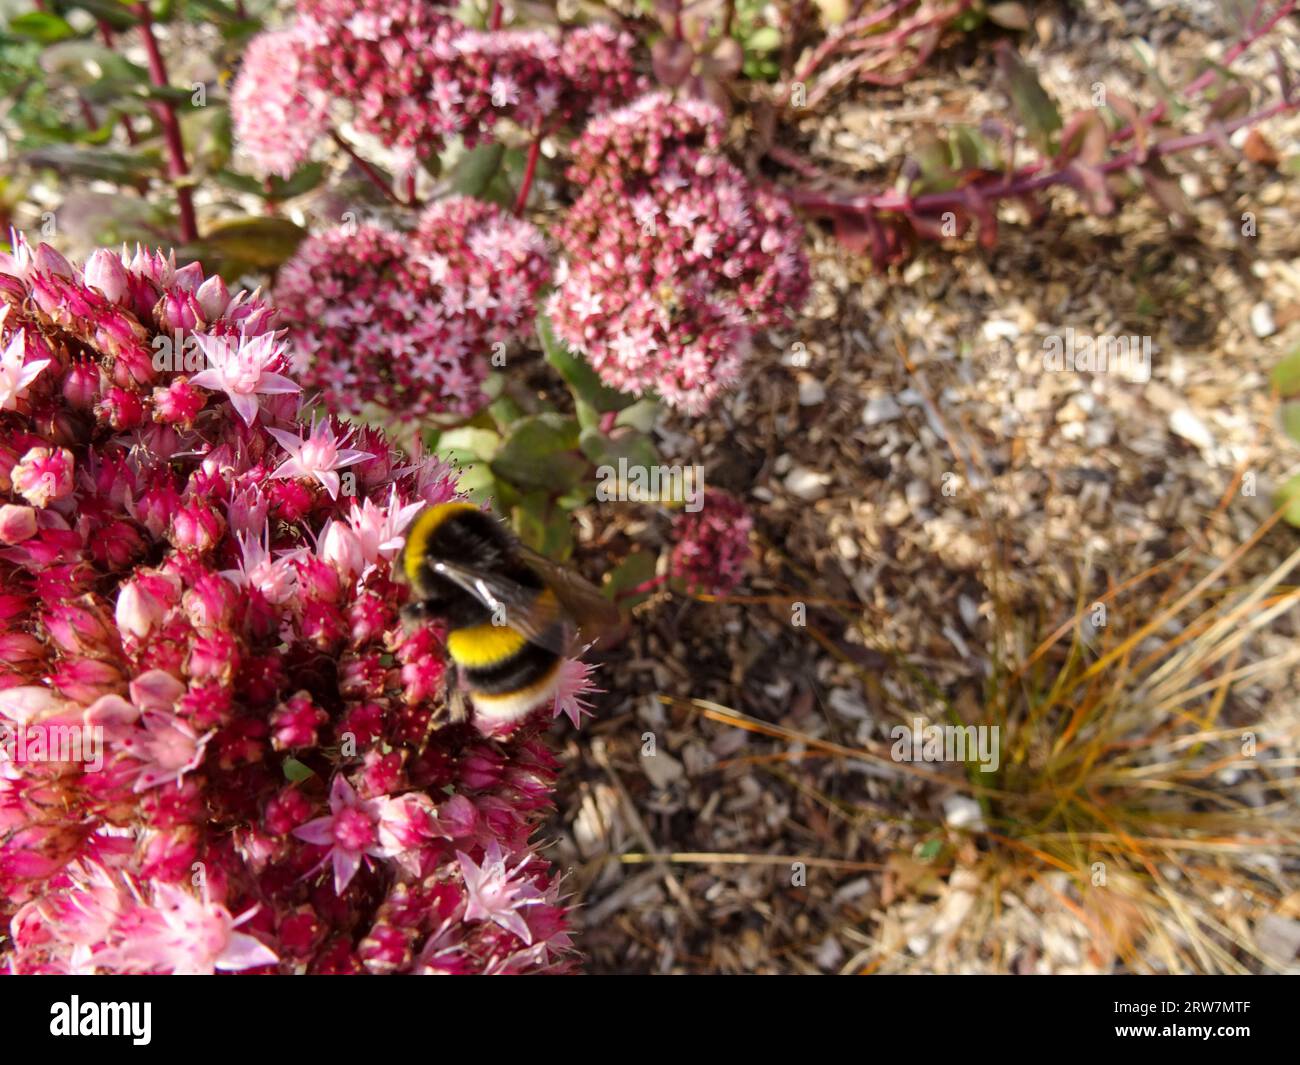 Natural close up pollinating plant portrait of Hylotelephium Matrona', stonecrop ‘Matrona’, with Bee Stock Photo